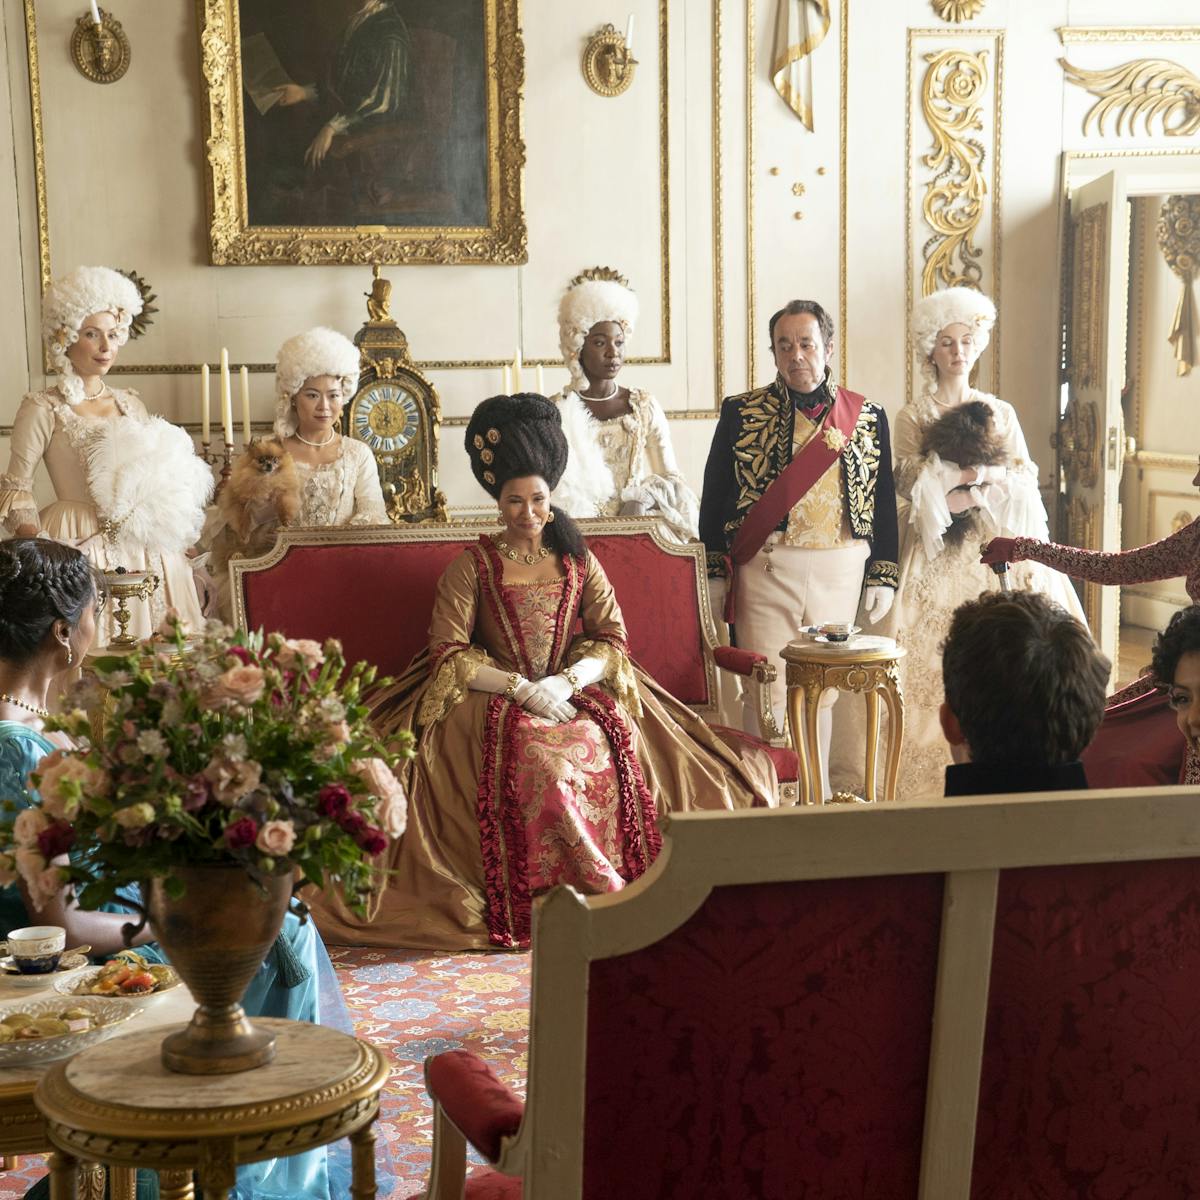 Kate Sharma (Simone Ashley), Queen Charlotte (Golda Rosheuvel), Lady Danbury (Adjoa Andoh), Edwina Sharma (Charithra Chandran), and Anthony Bridgerton (Jonathan Bailey) sit around an ornate living room surrounded by people in wigs.